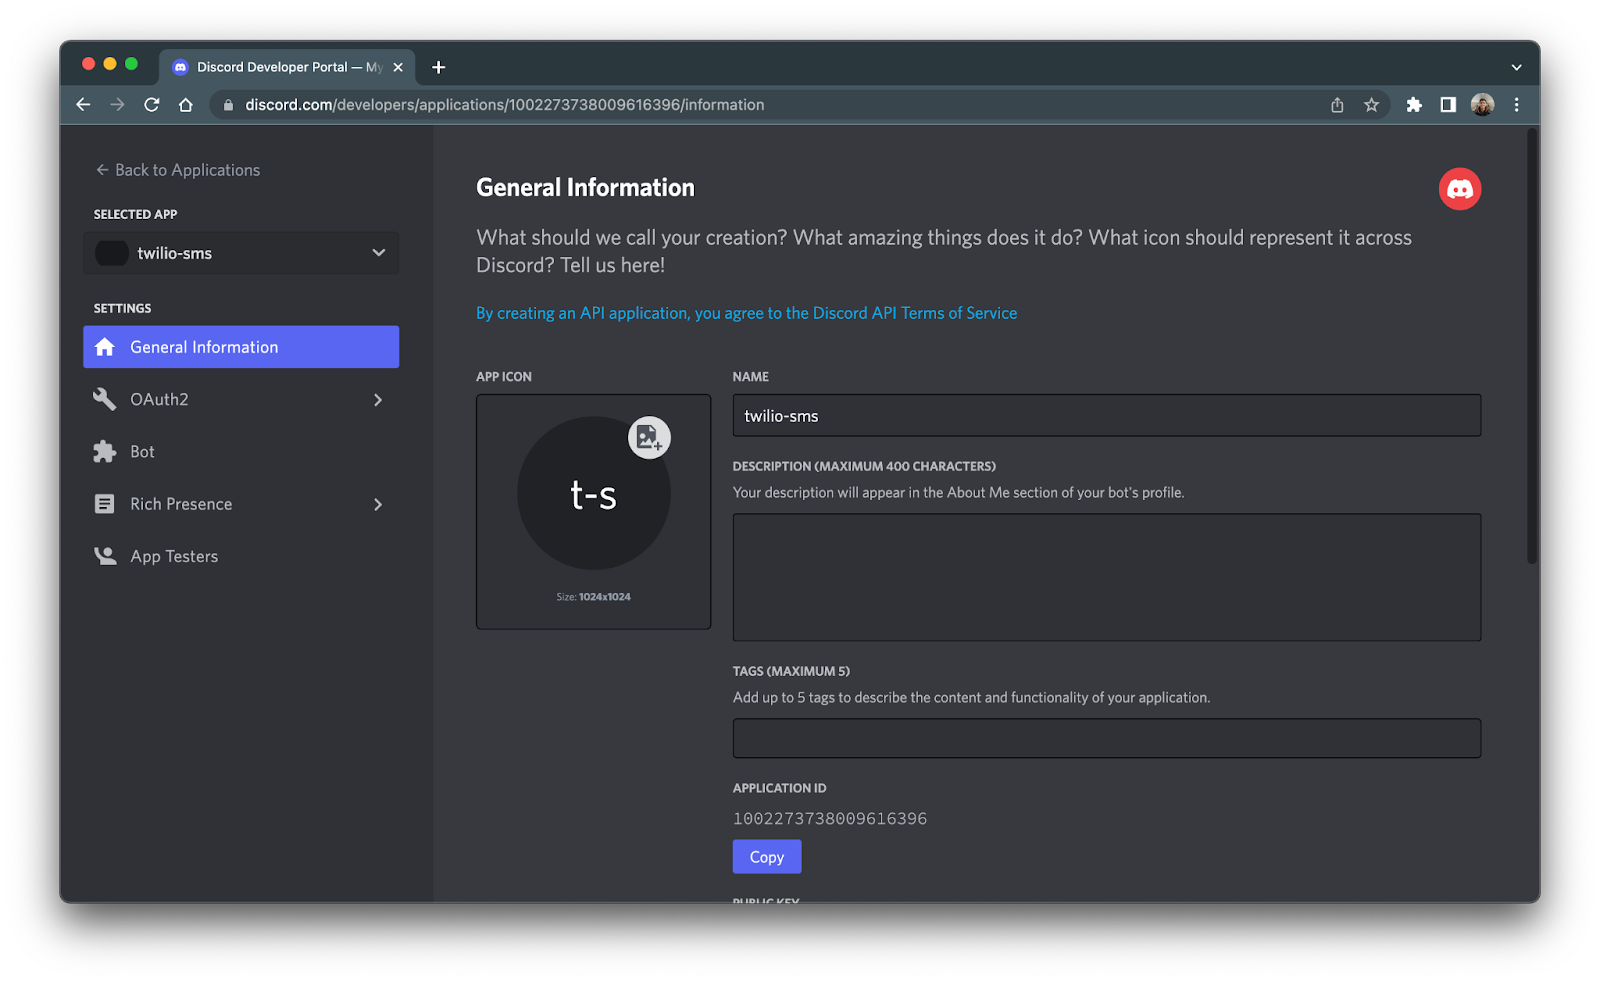 General information page of the newly created discord application